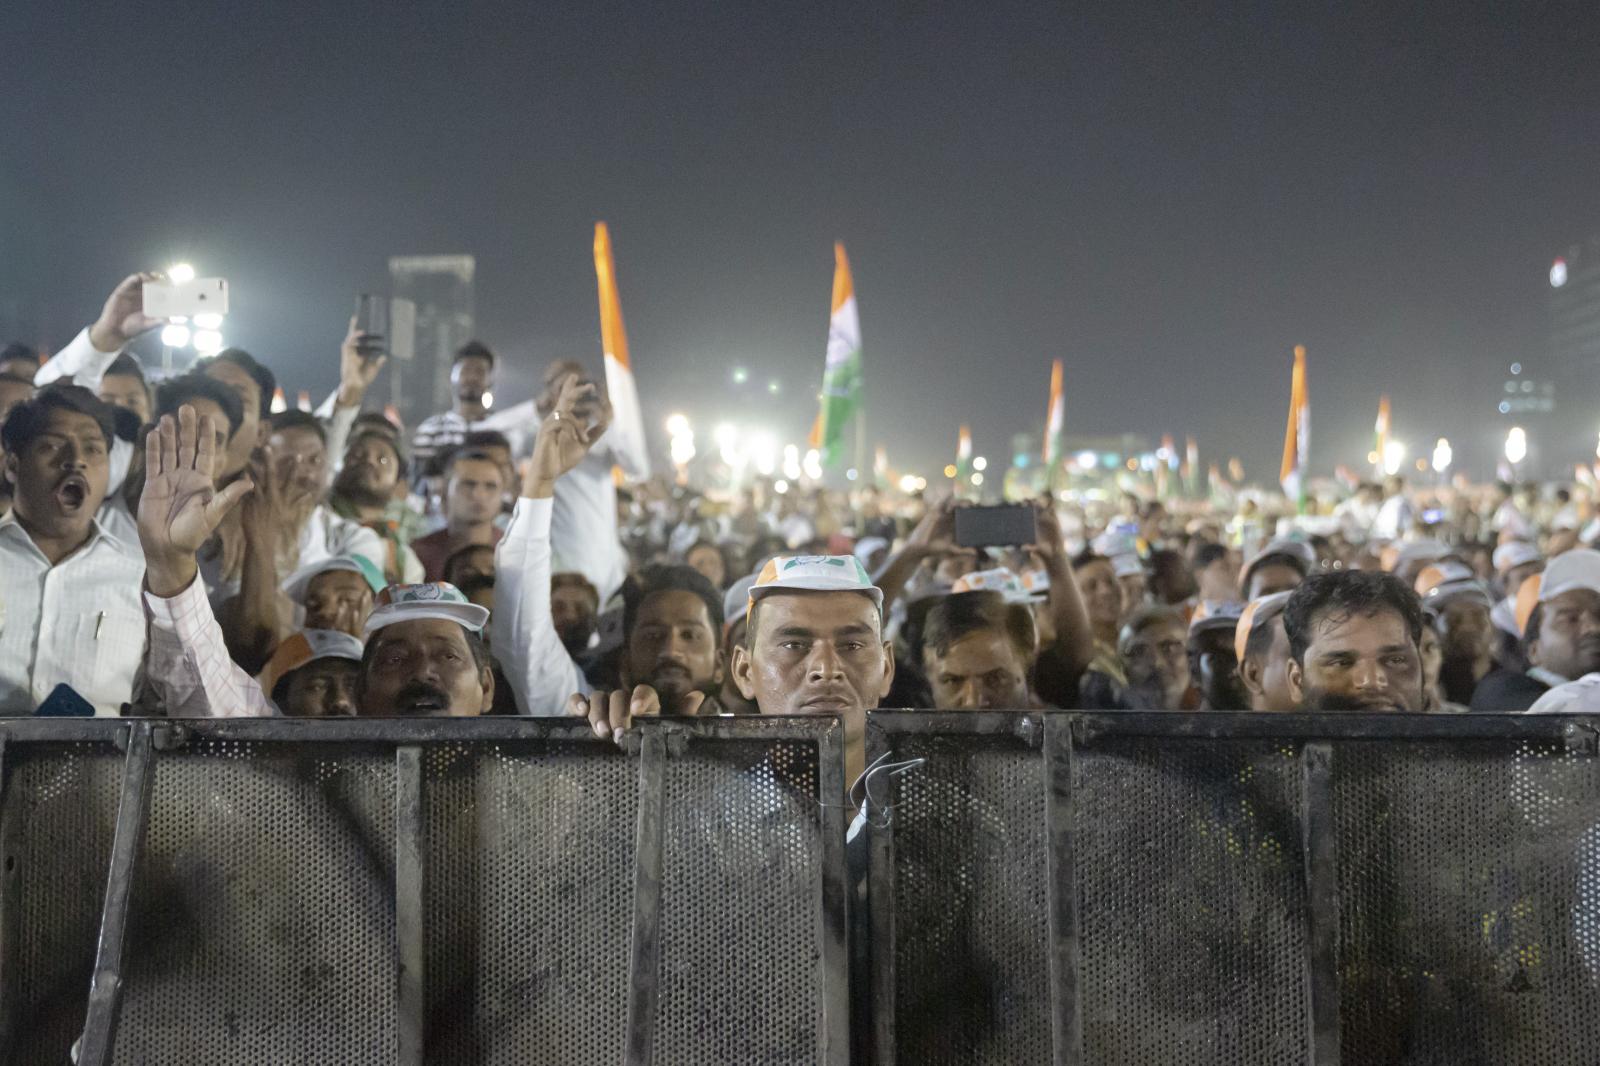 A crowd cheers at a Congress Party rally in Mumbai.